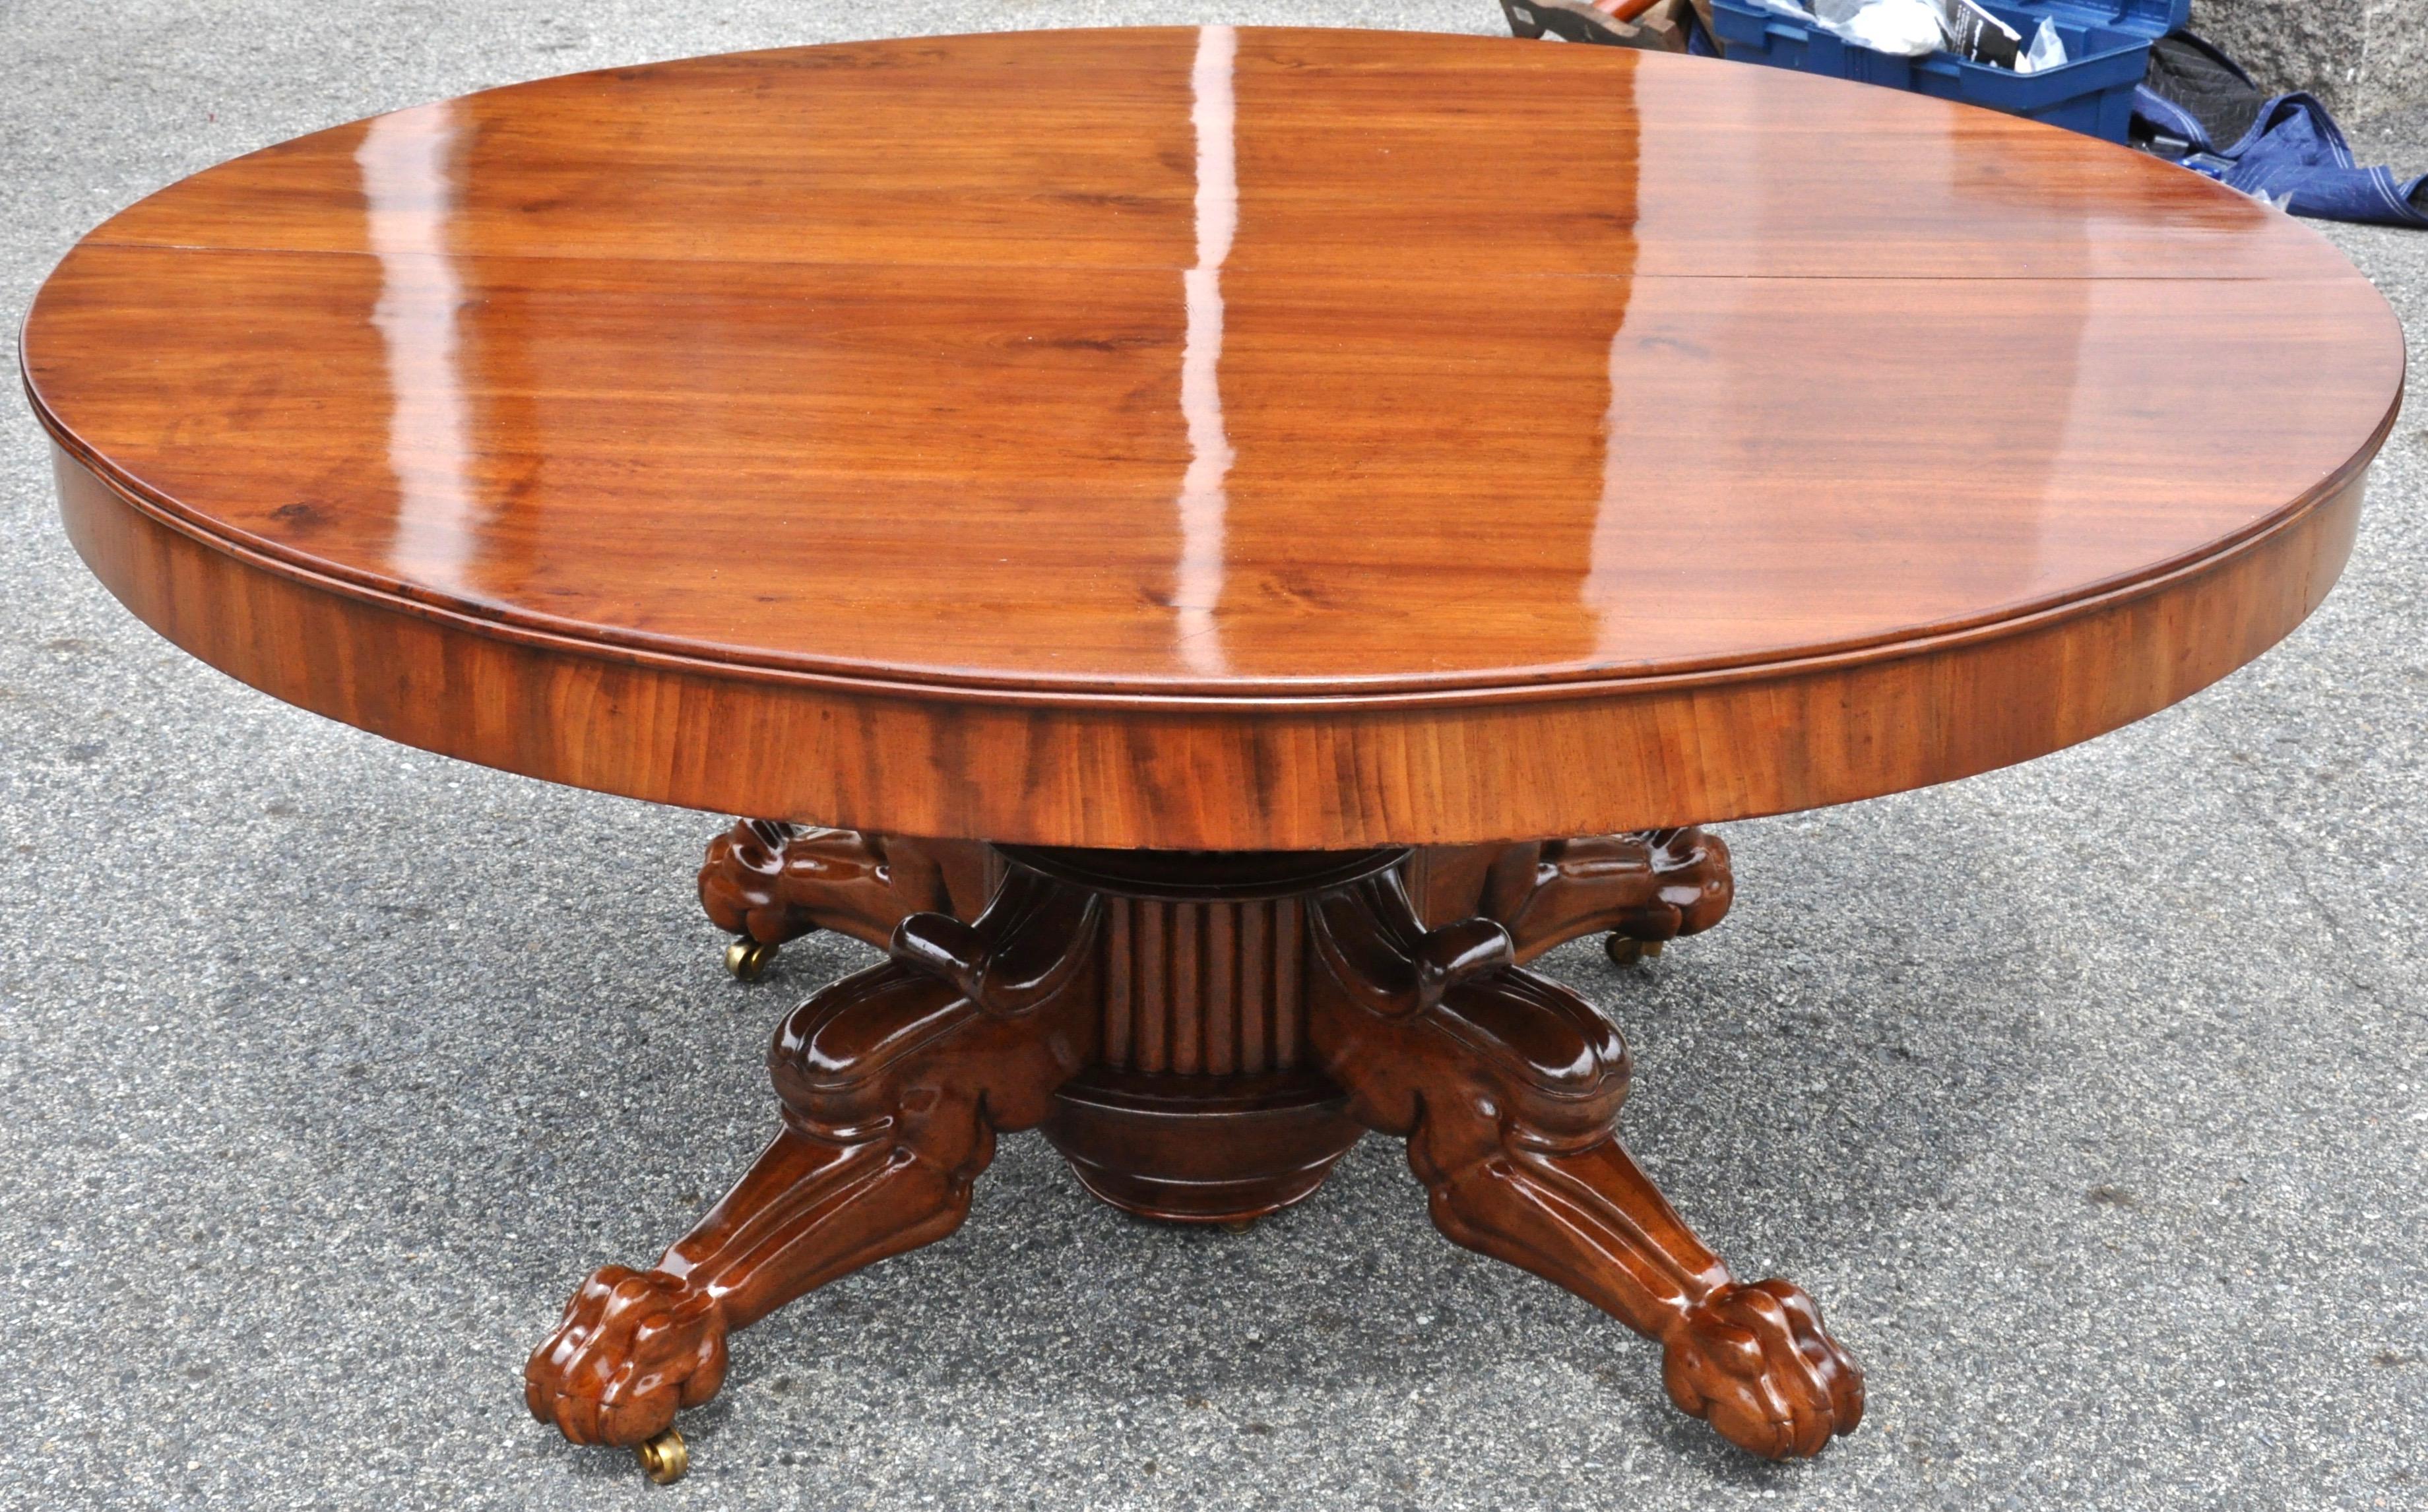 Baltic Period Early 19th Century Neoclassical Walnut Round Expanding Dining Table